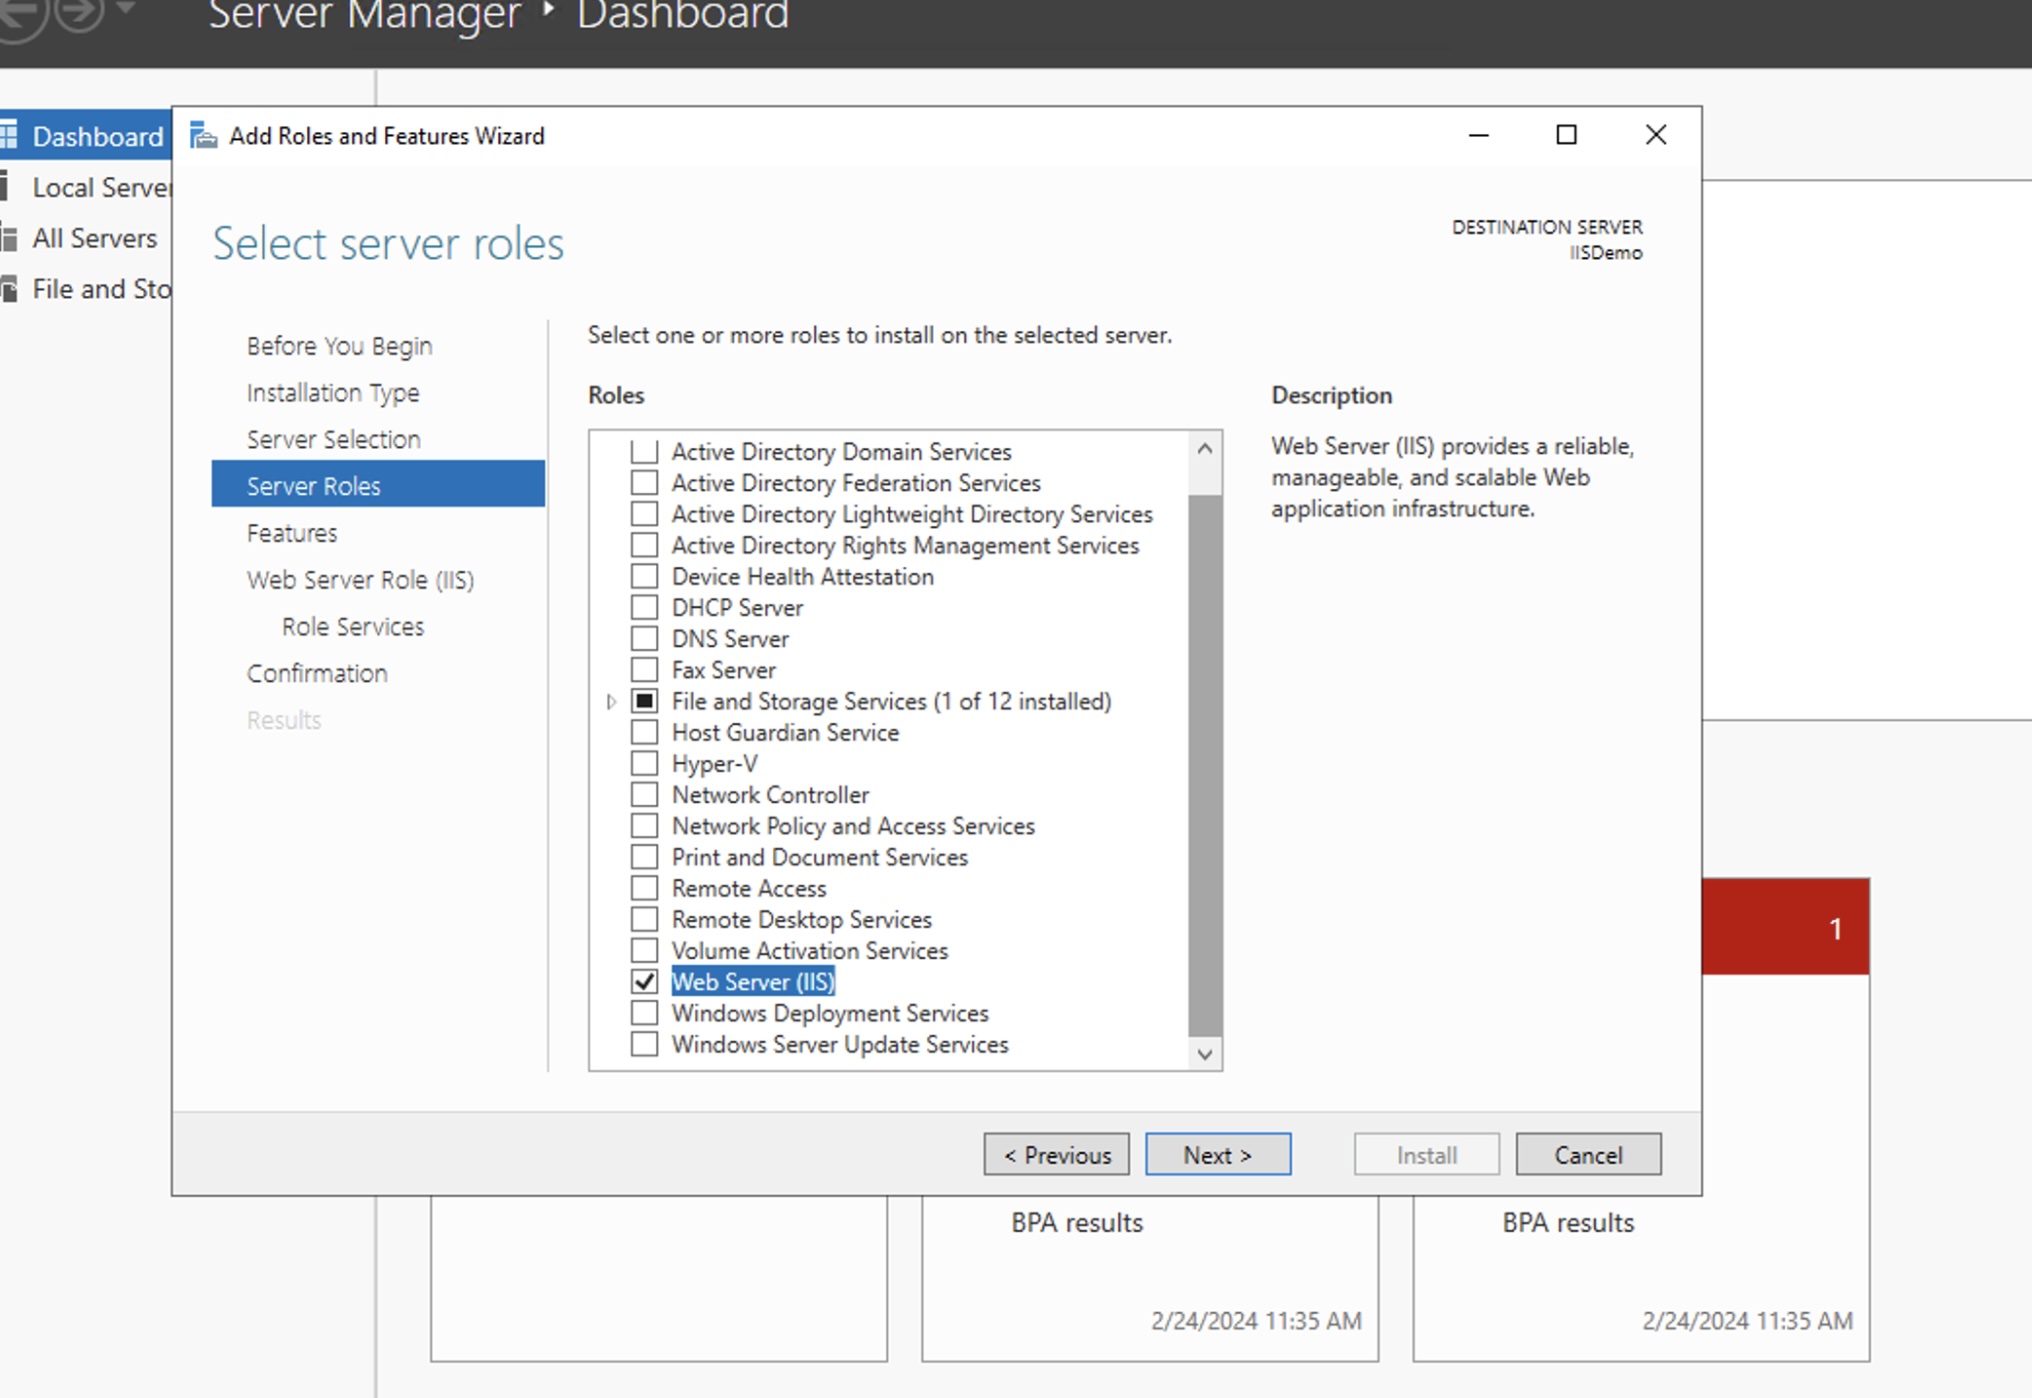 IIS Role installation under server manager, Roles and Features.